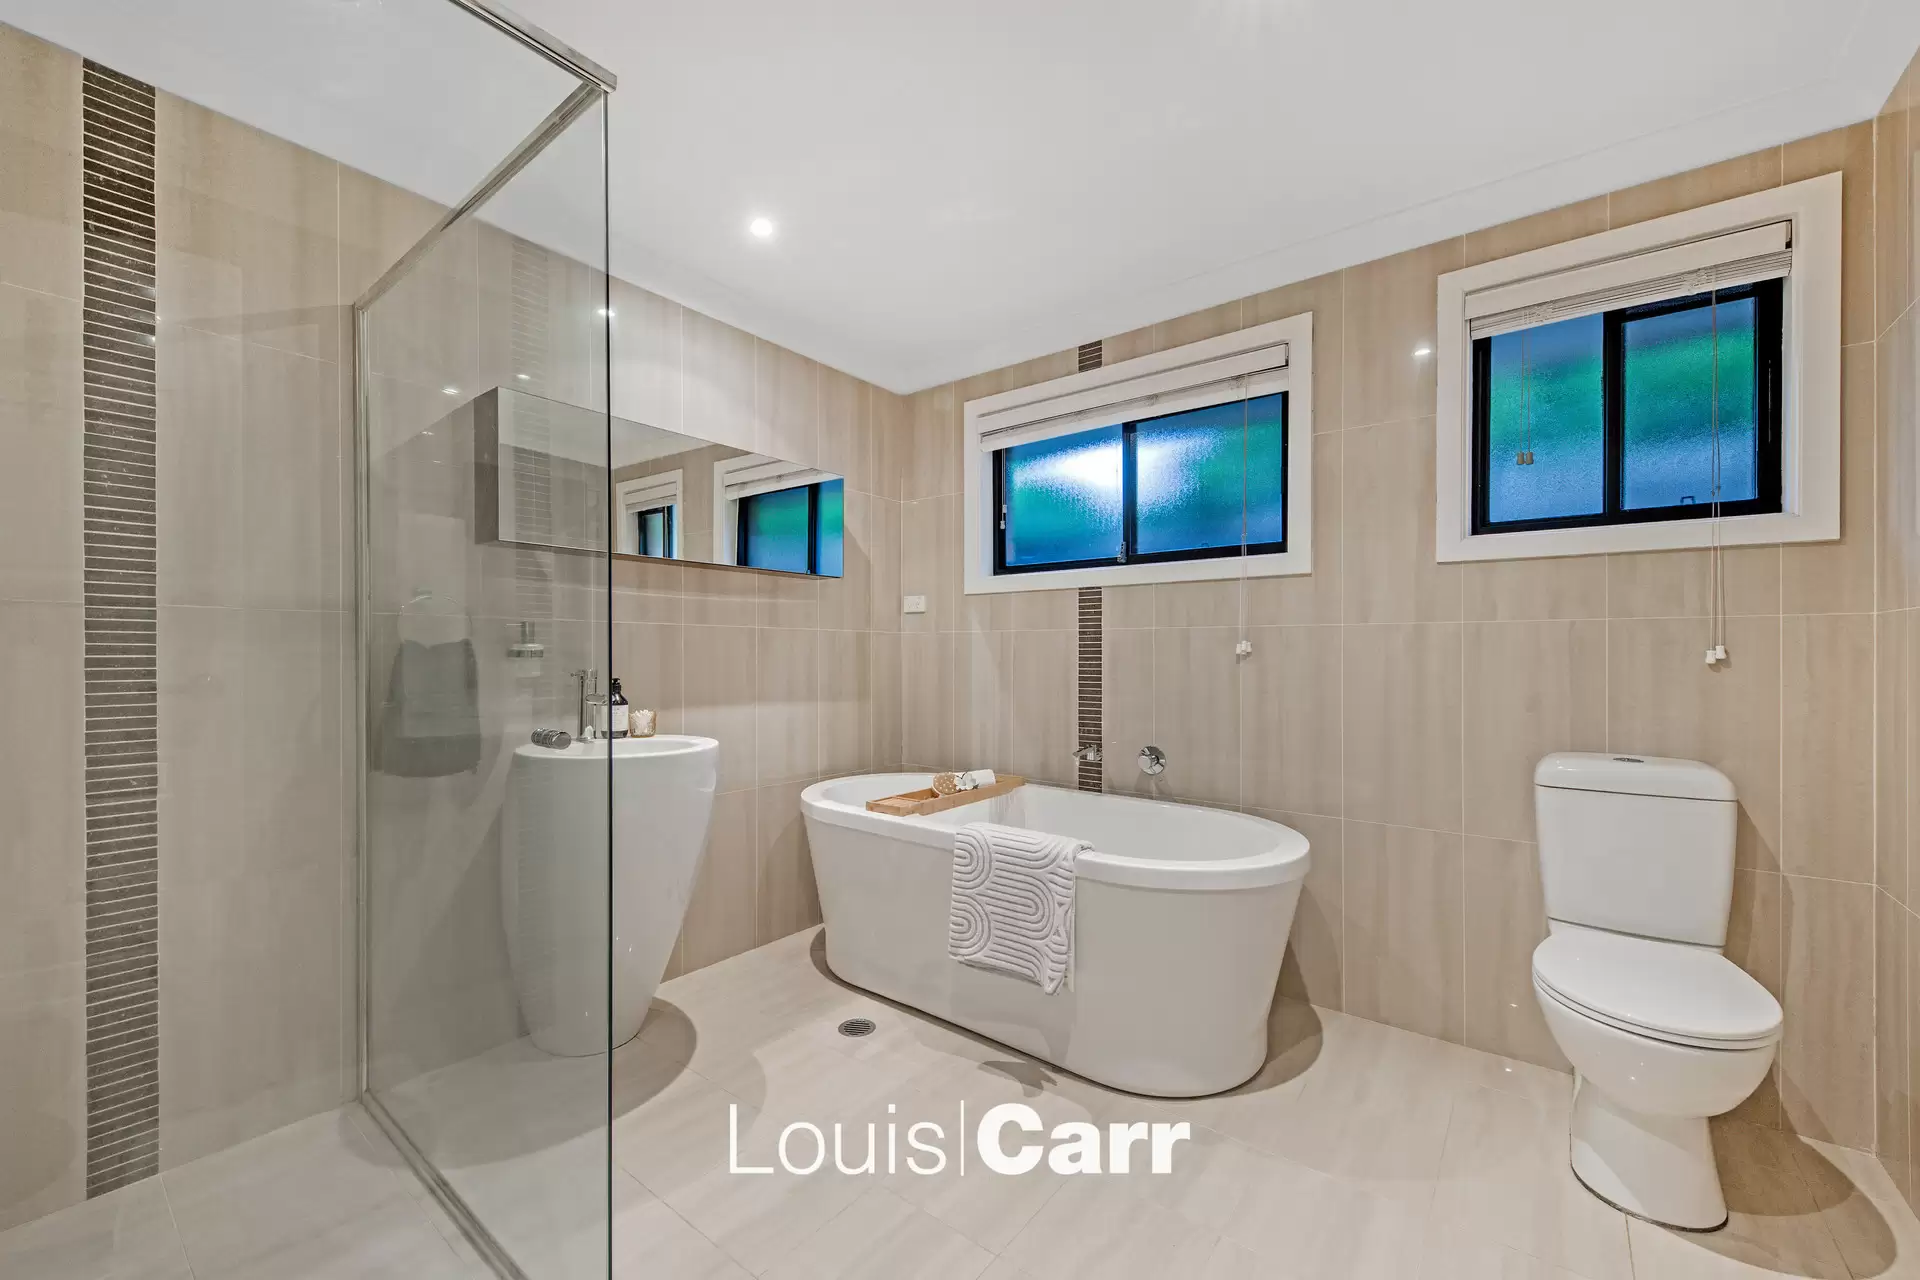 Photo #12: 18 Chiltern Crescent, Castle Hill - Sold by Louis Carr Real Estate